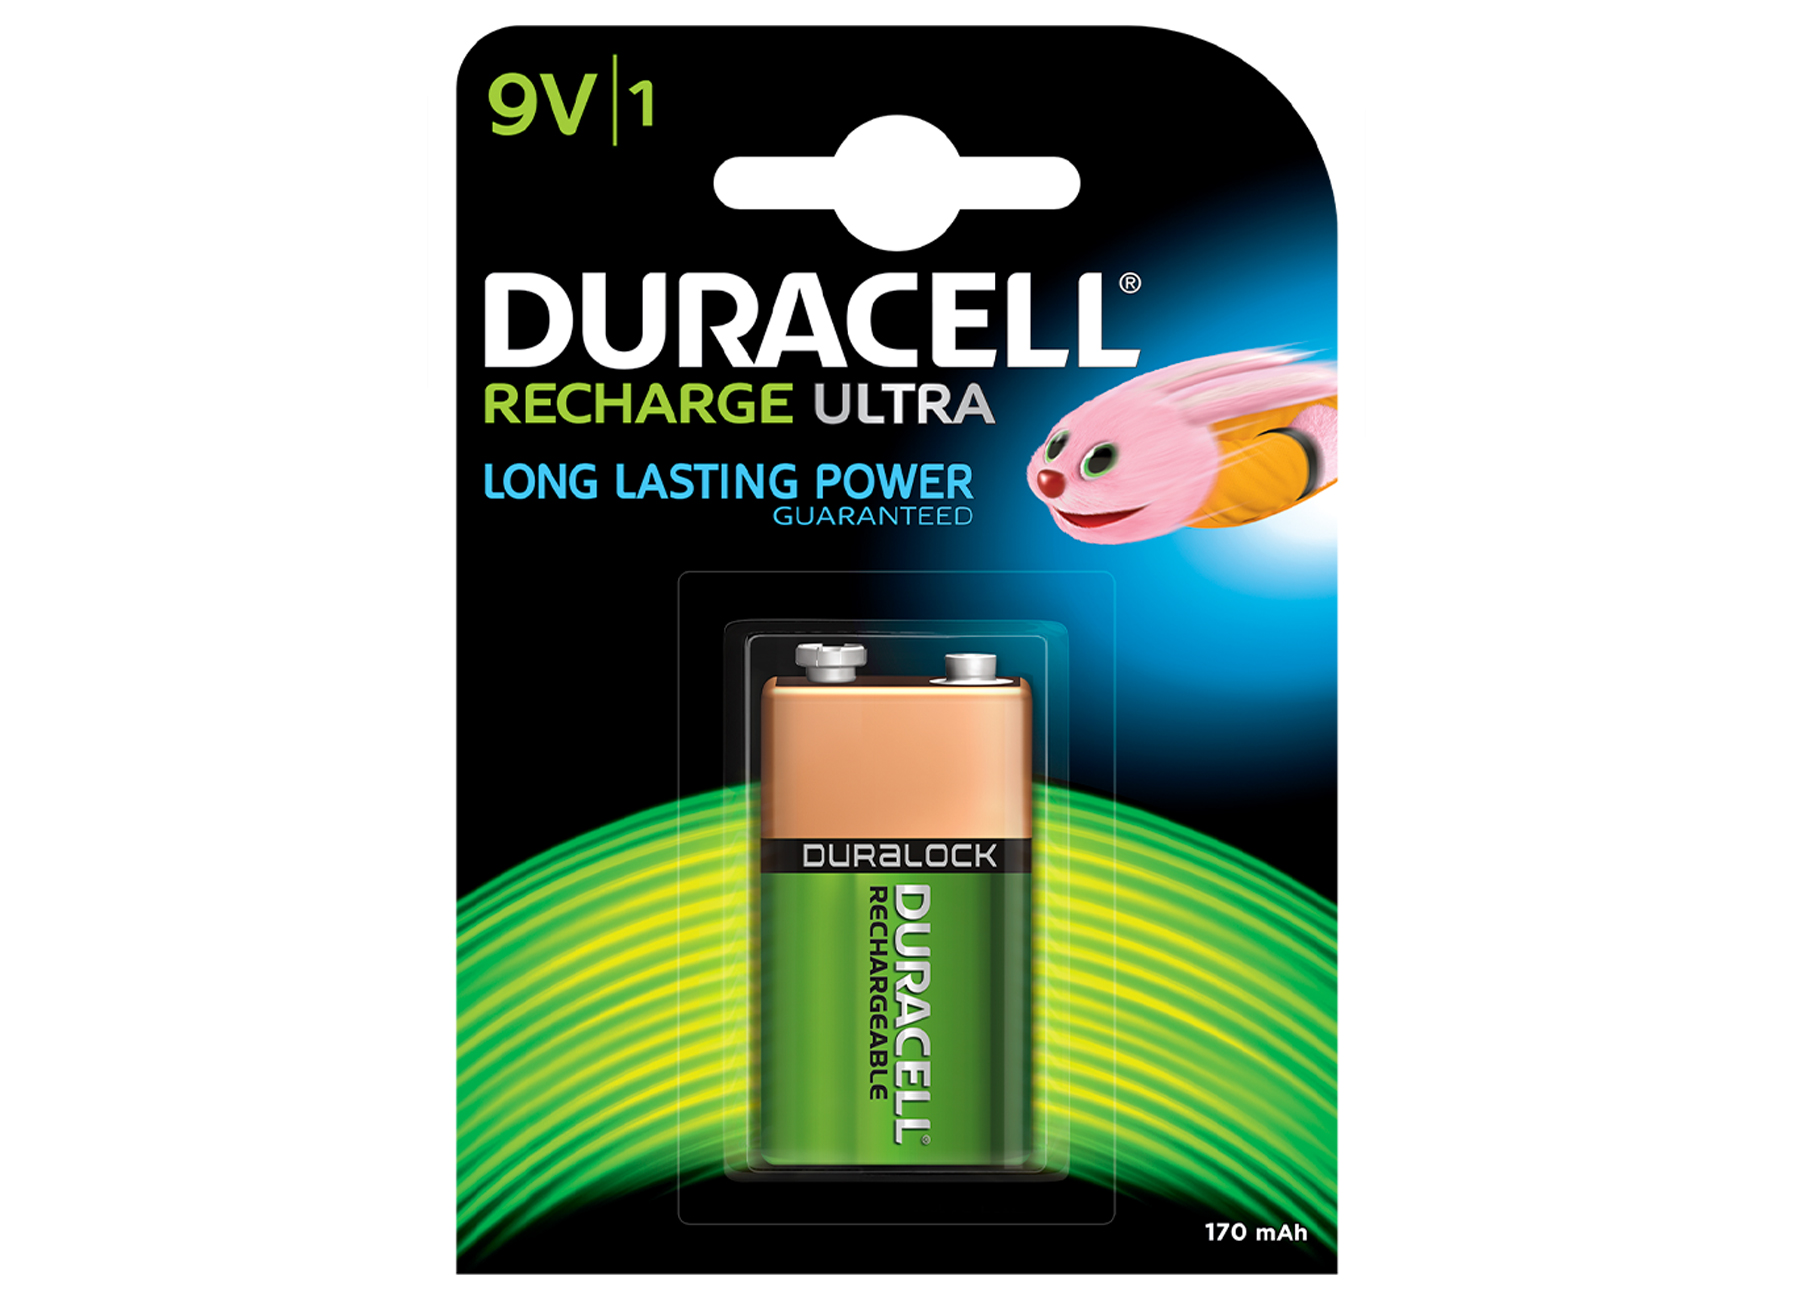 DURACELL RECHARGEABLE 9V HR22 1-PACK 170MAH